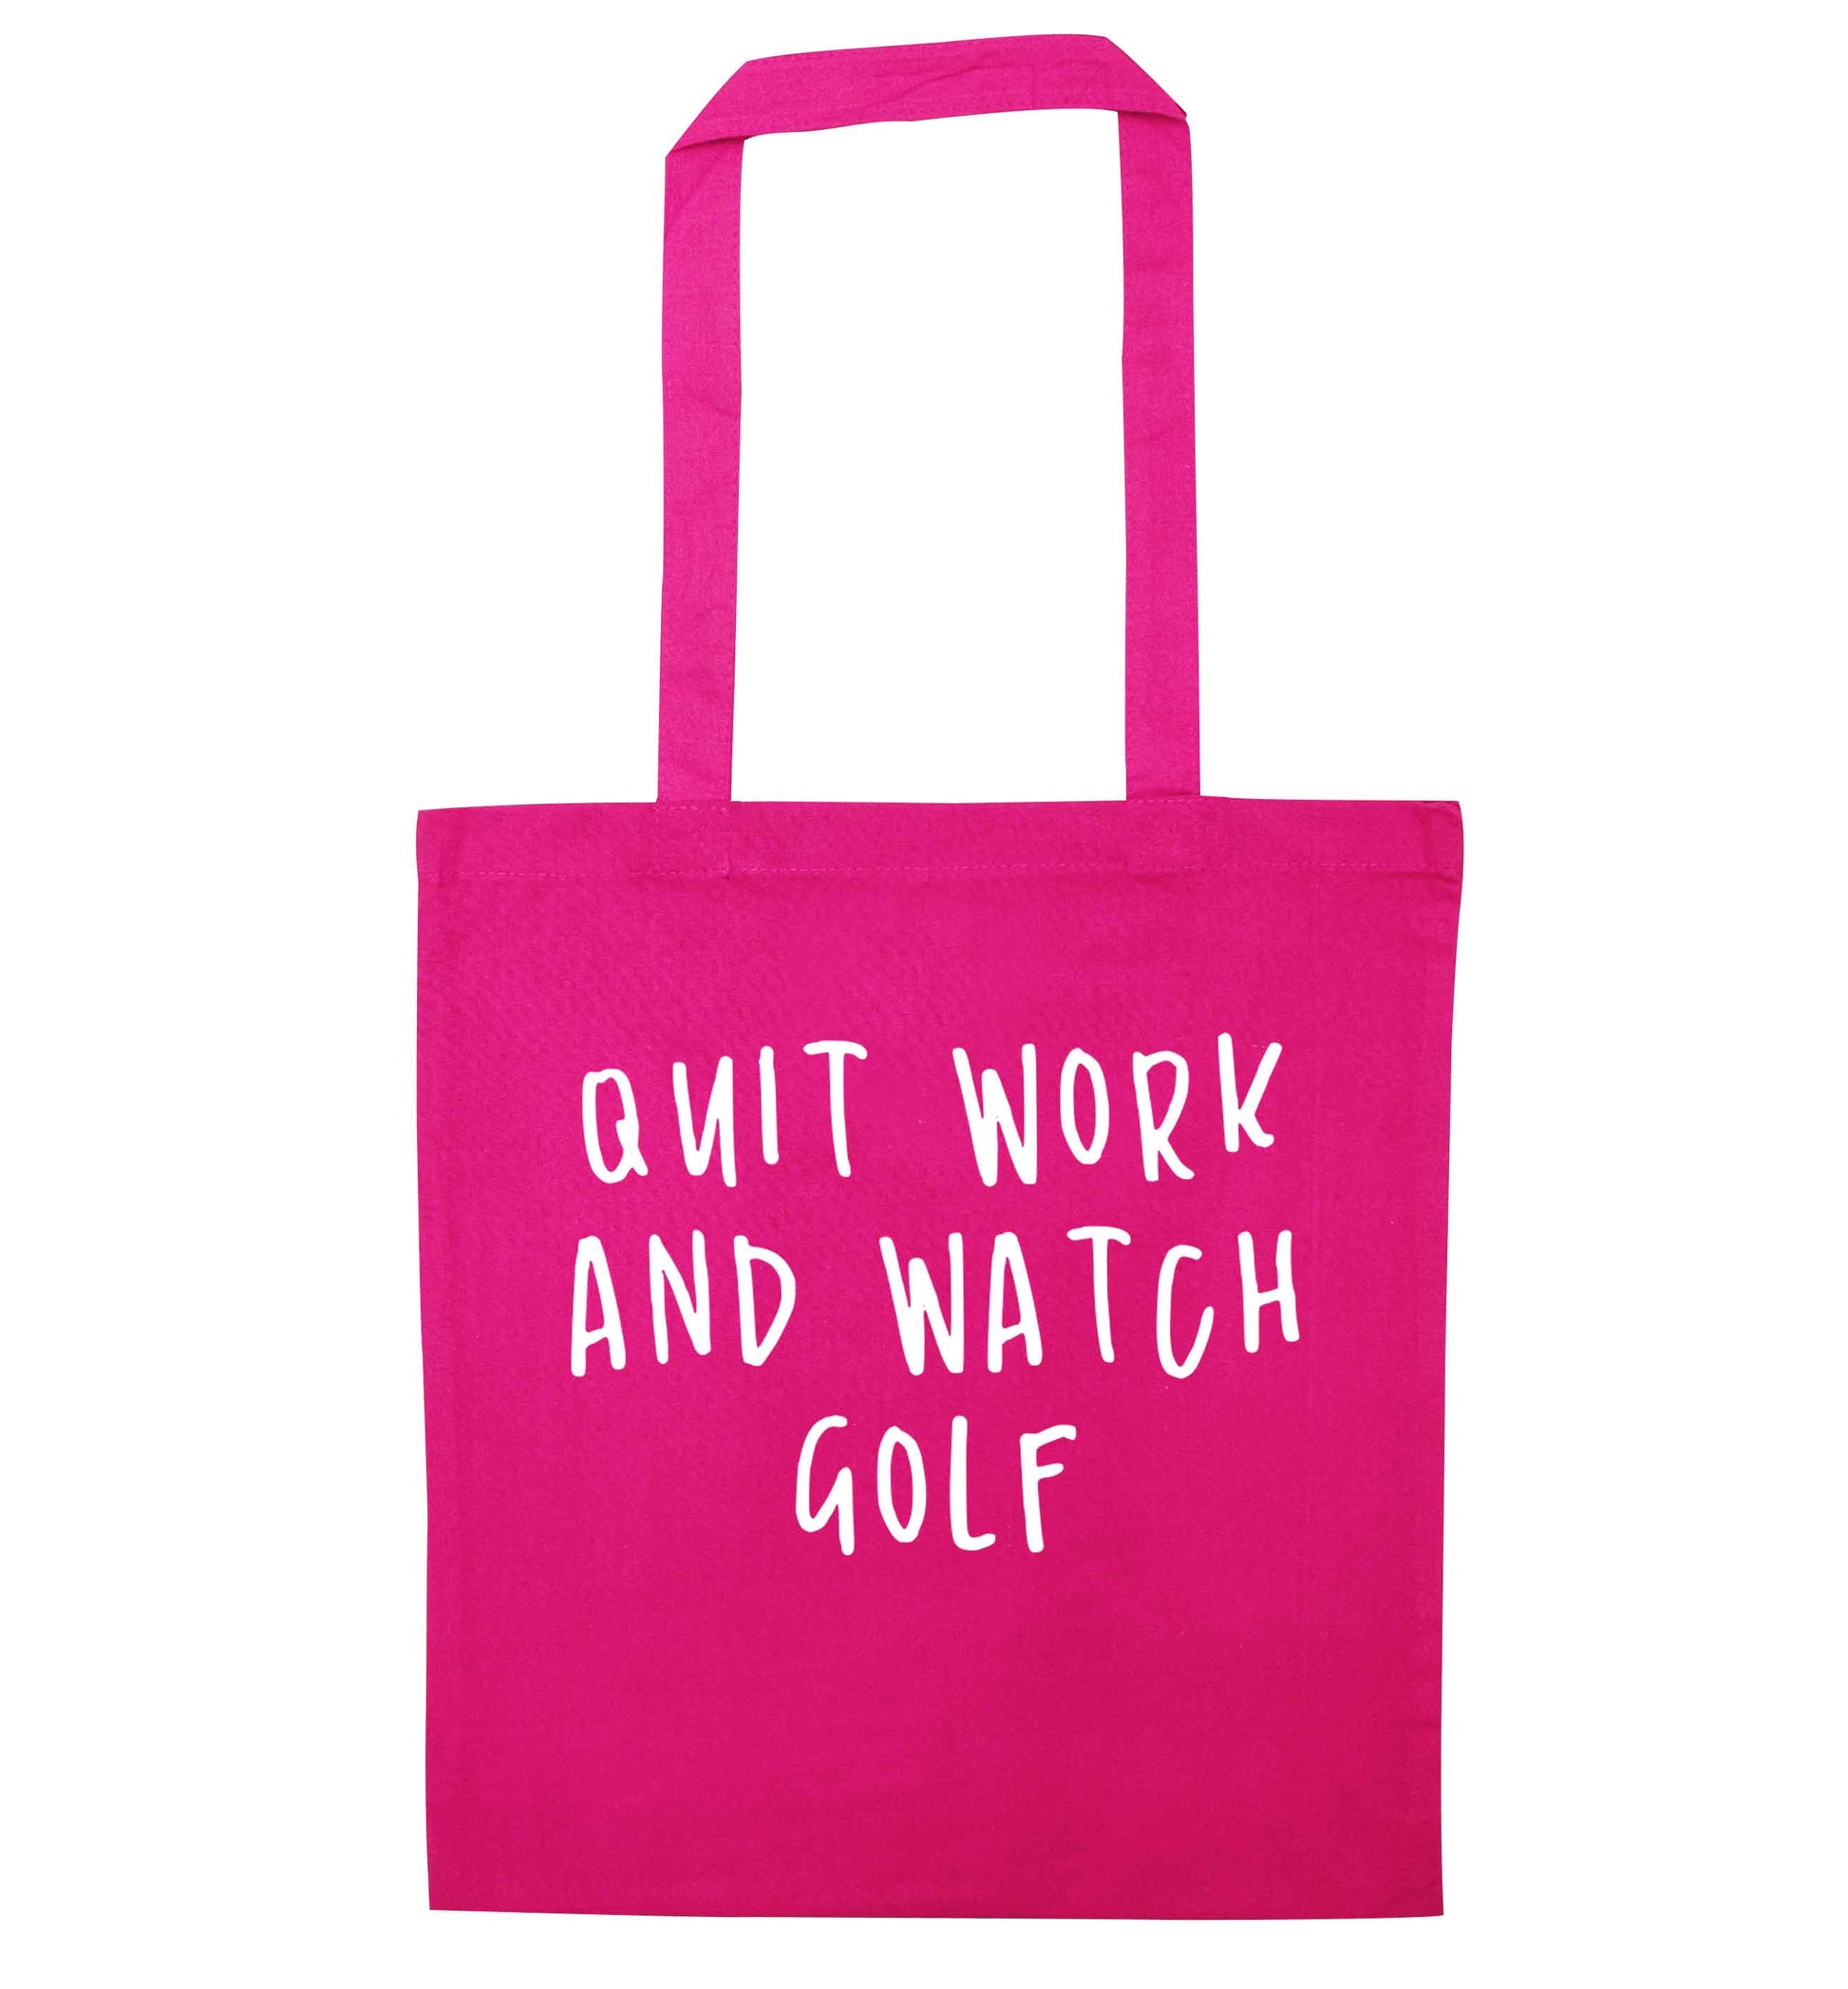 Quit work and watch golf pink tote bag